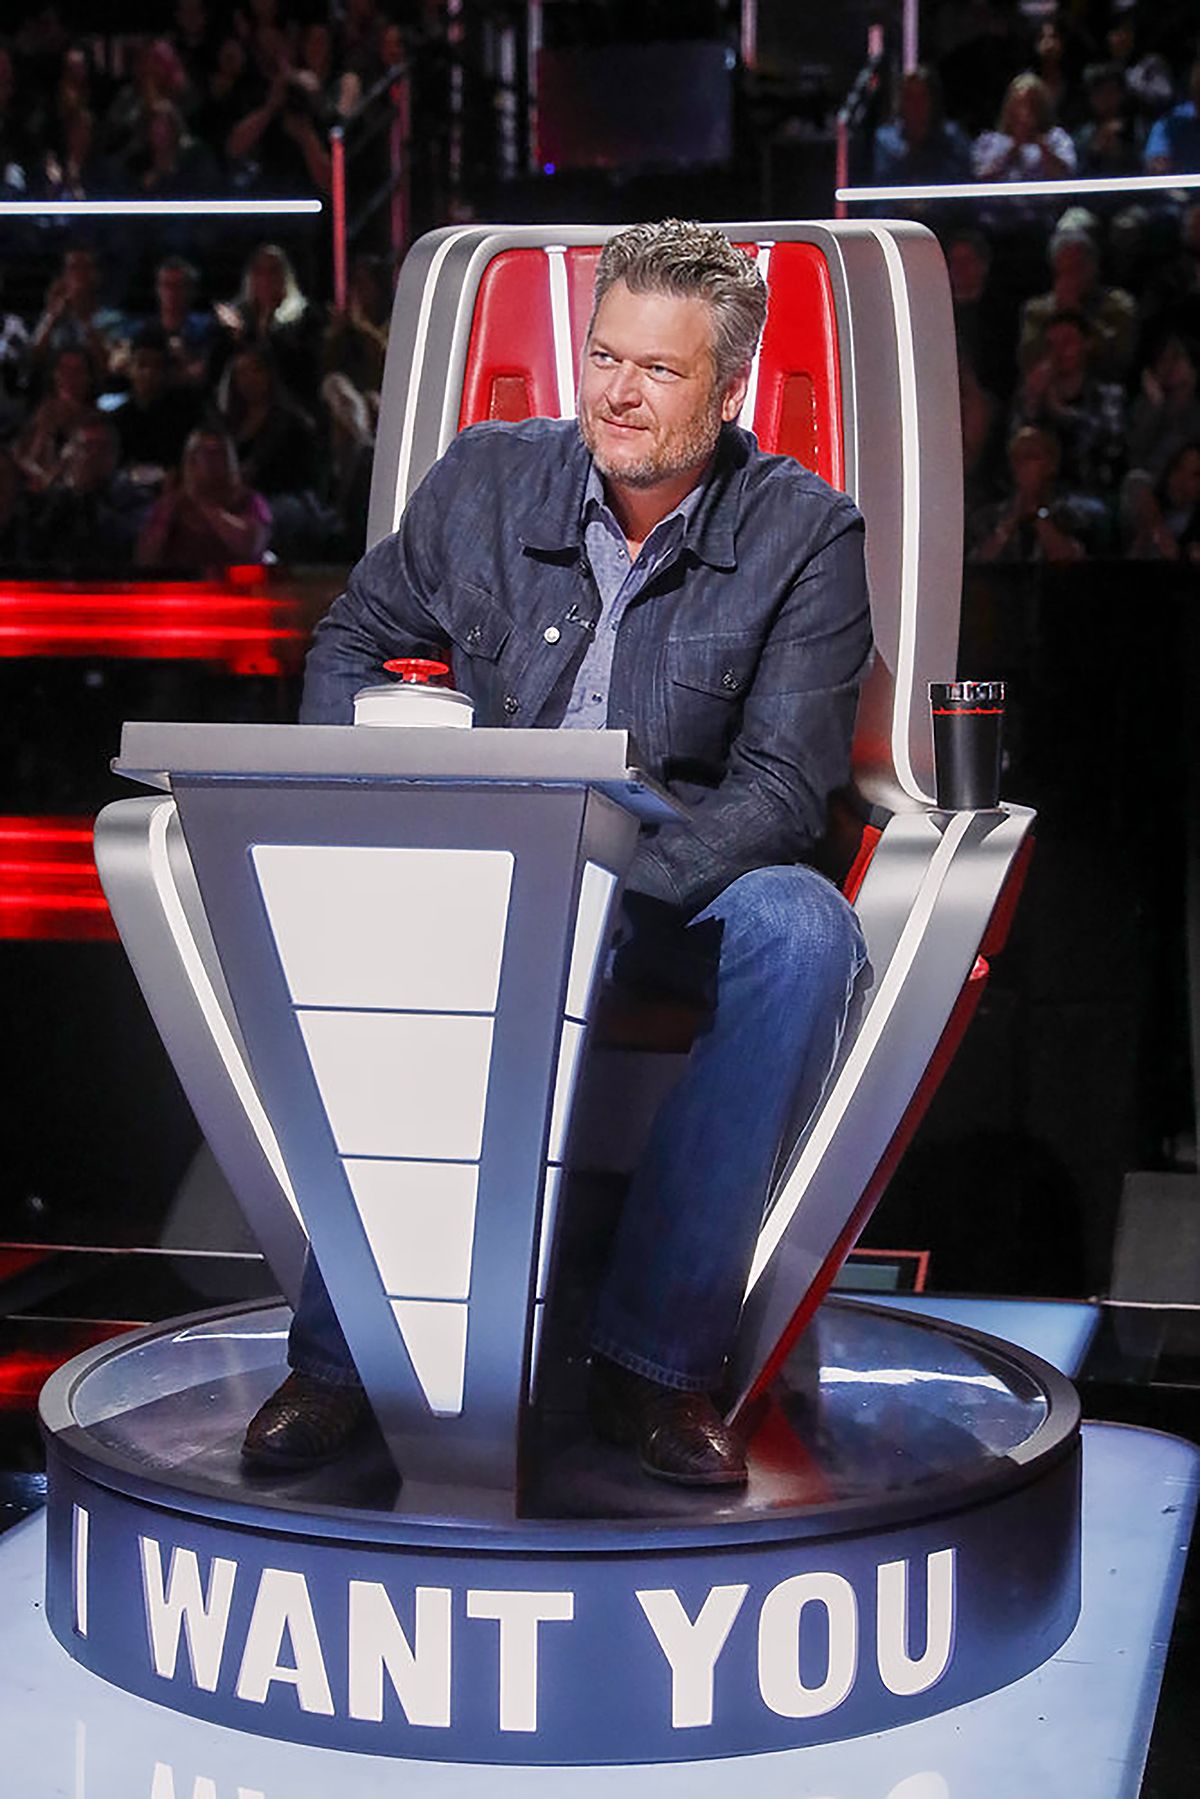 Blake Shelton Jokes About Being Inbred On The Voice